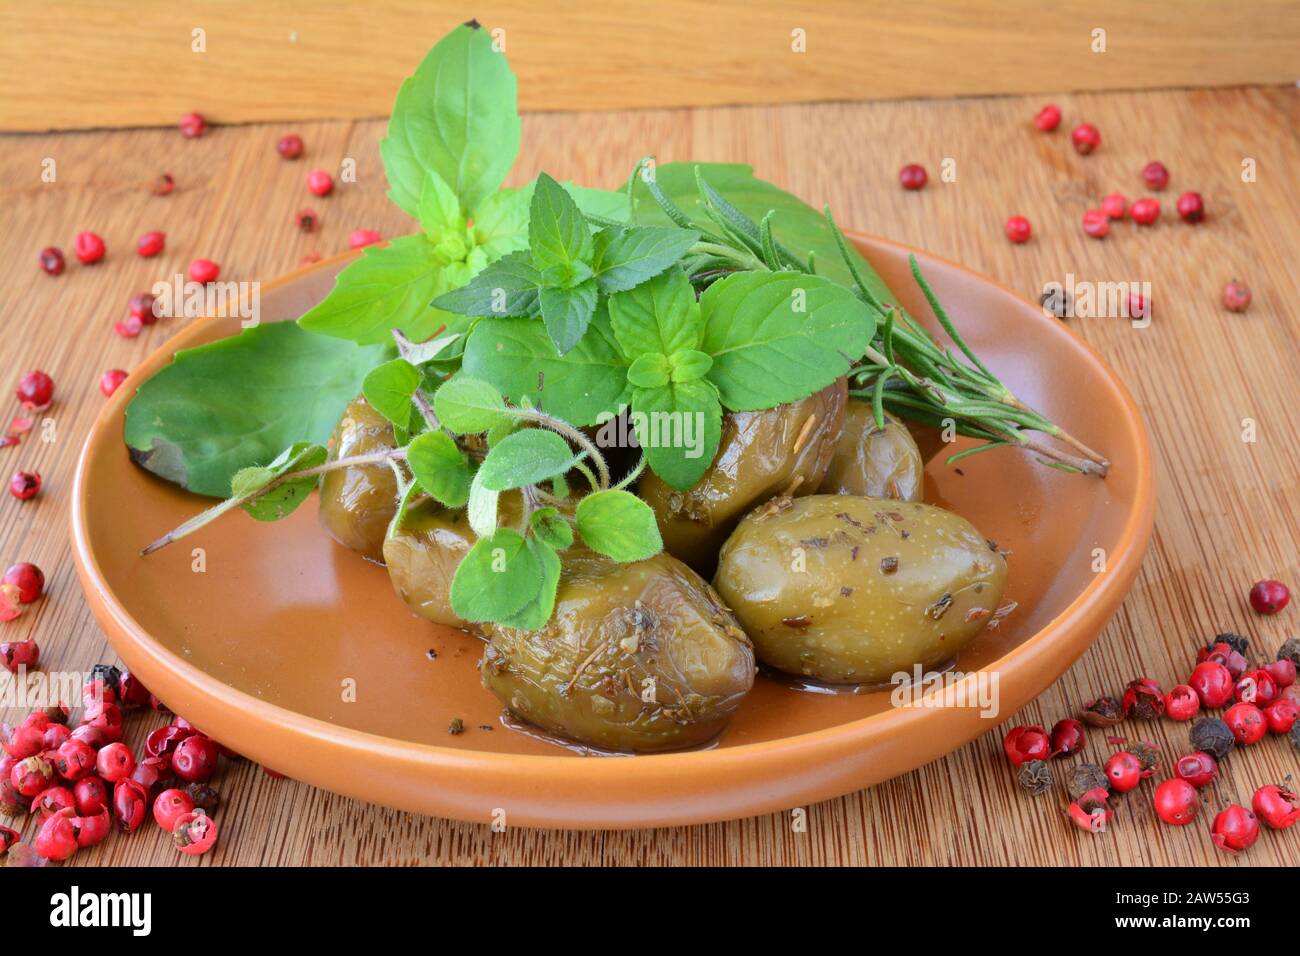 Aromatic green olives in rustic ceramic saucer, decorated with green basil, oregano, rosemary, peper and mojito mint leaves and red pepper, on wooden Stock Photo